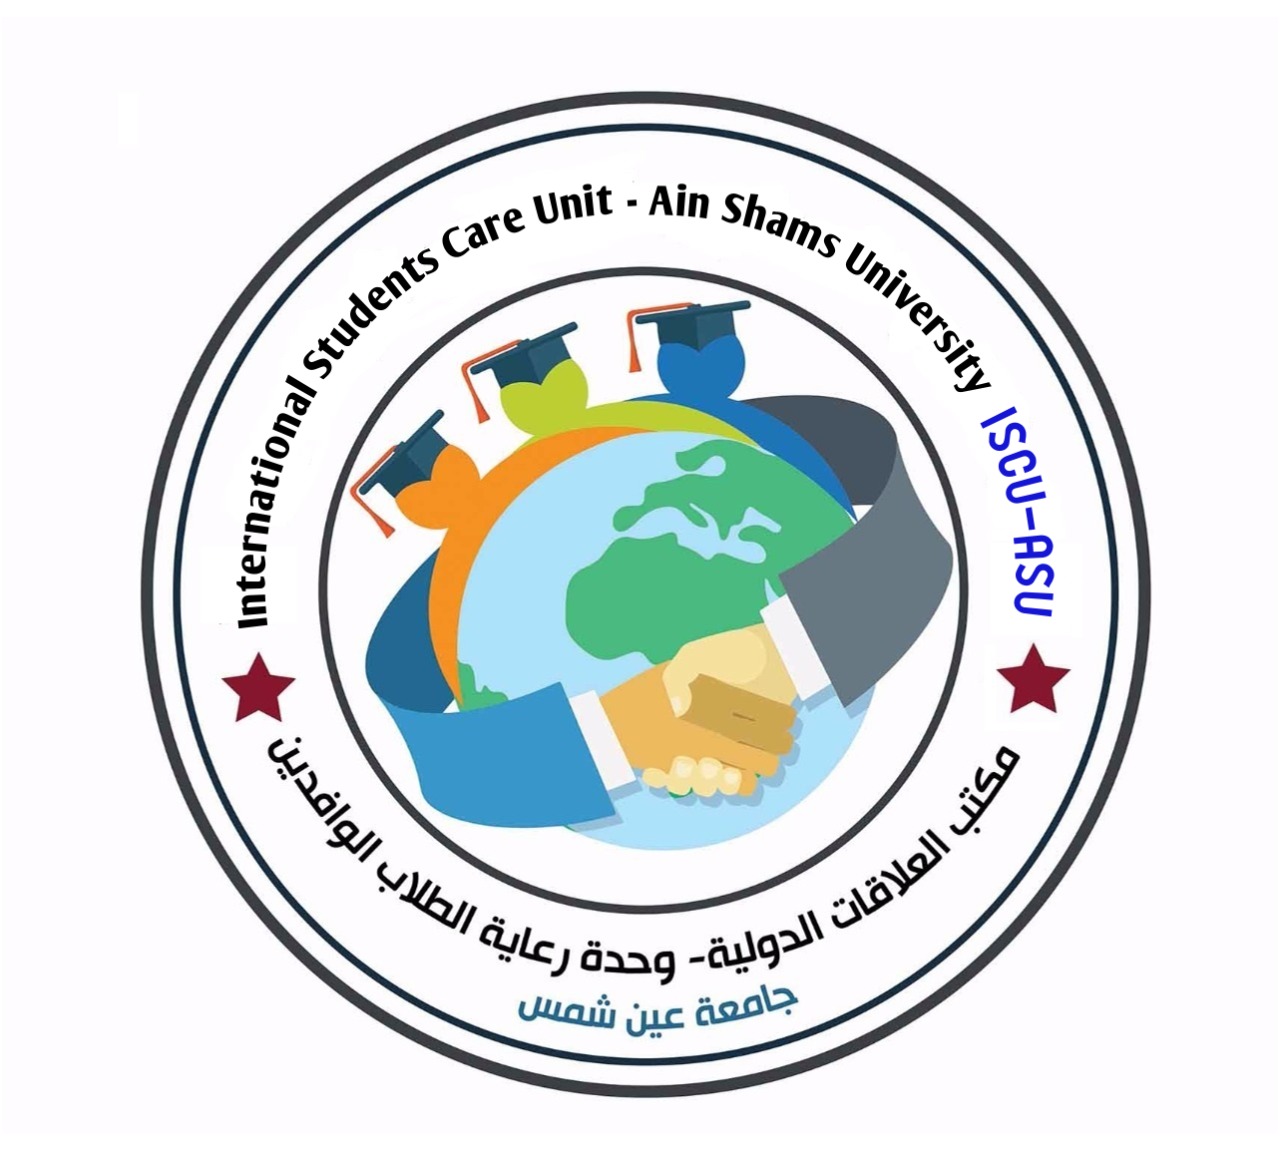 Ain Shams University launches the Integrated Student Care Unit